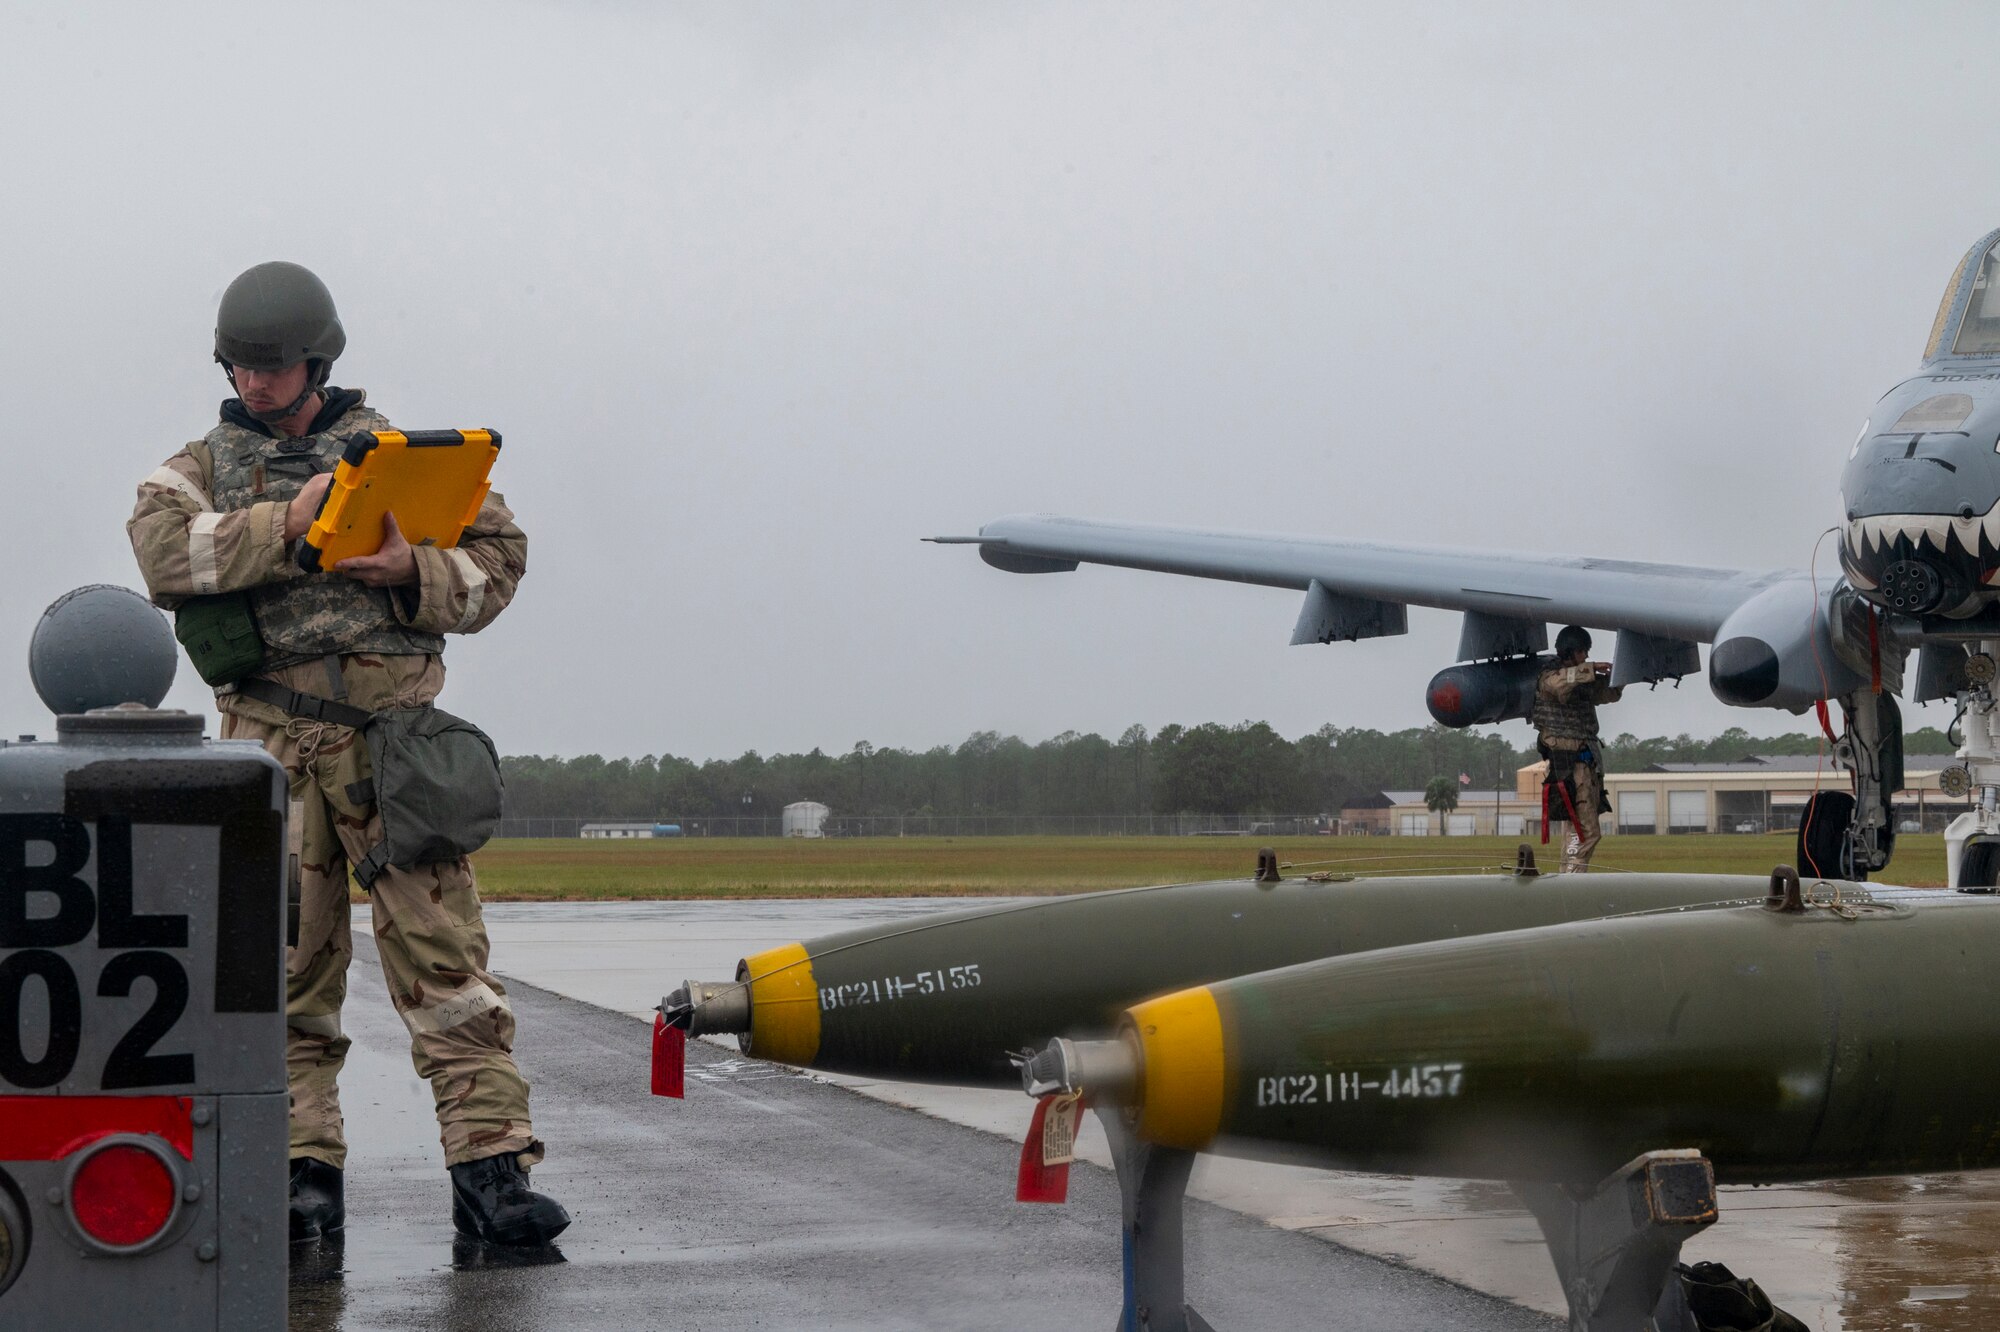 U.S. Air Force Tech. Sgt. Keith Bryan, 74th Fighter Generation Squadron weapons expediter, checks a rocket pod at Avon Park Air Force Range, Florida, Nov. 15, 2023. The less then ideal weather and bulky exercise protective gear further tested the multi-capable Airmen team on their speed and efficiency to relaunch the A-10C Thunderbolt IIs as fast as possible.
(U.S. Air Force photo by Airman 1st Class Leonid Soubbotine)